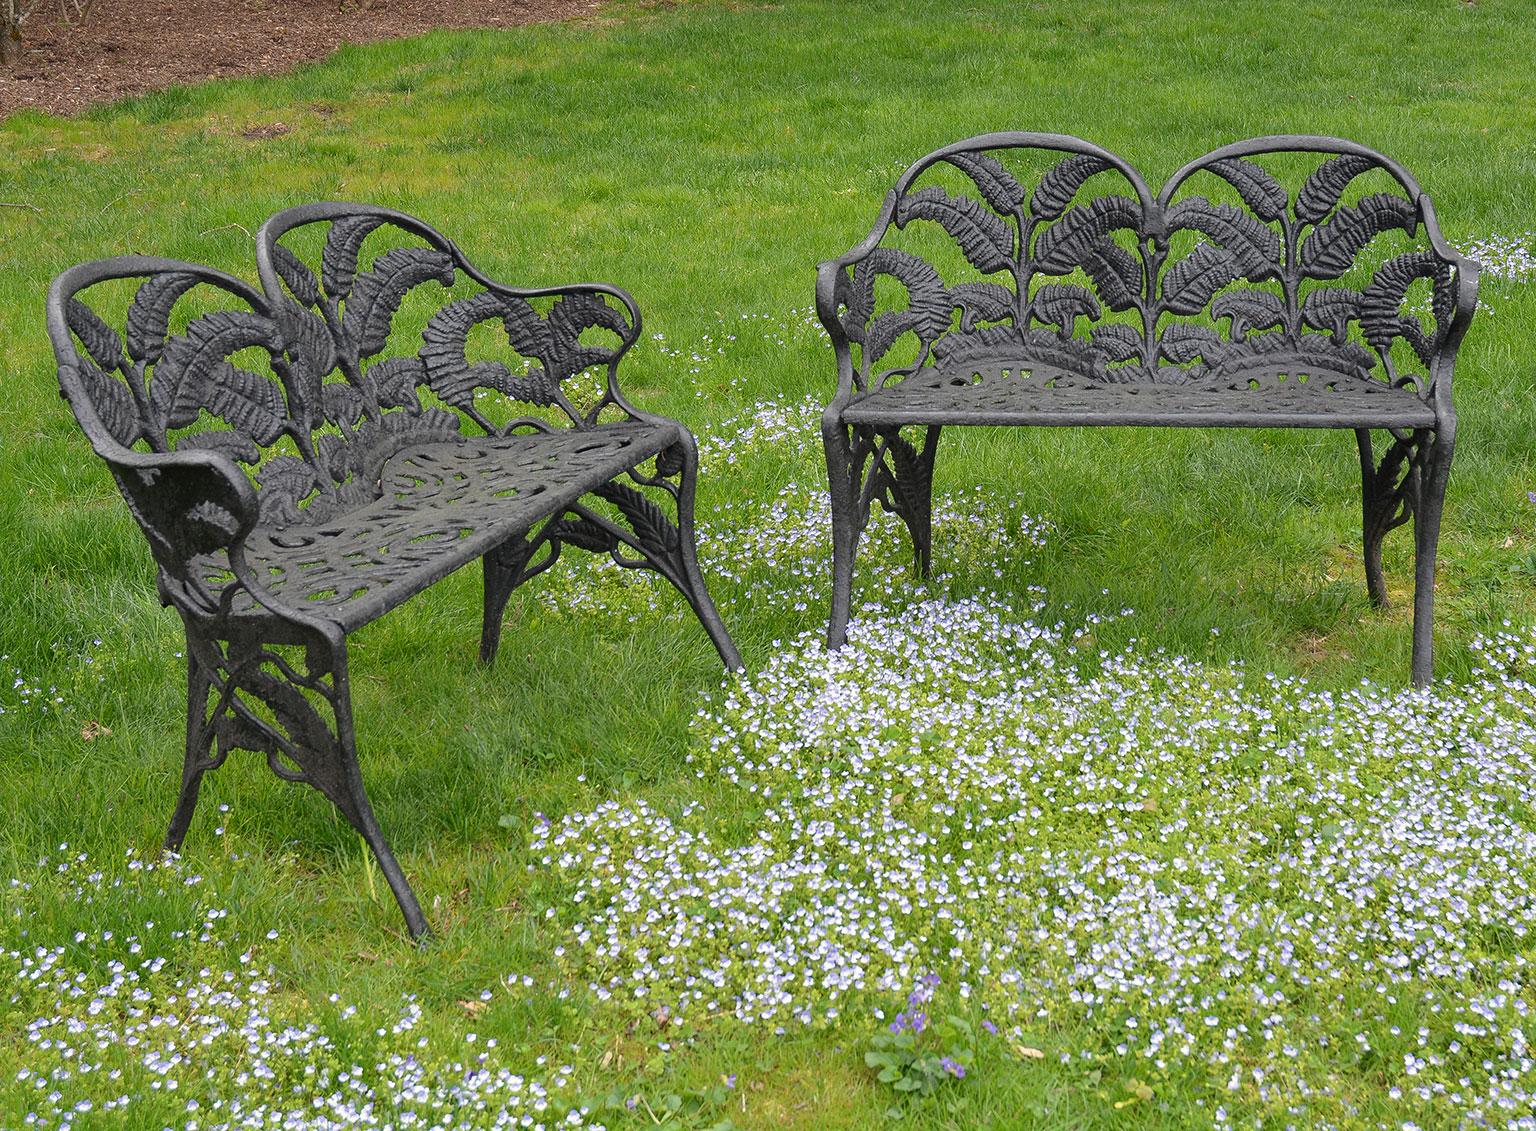 An exceptional pair of cast-iron settees in the fern pattern.

This pattern is a variation of a more common Fern pattern. This rare variation is known to have been produced by at least two American makers, but doesn’t seem to have been produced by